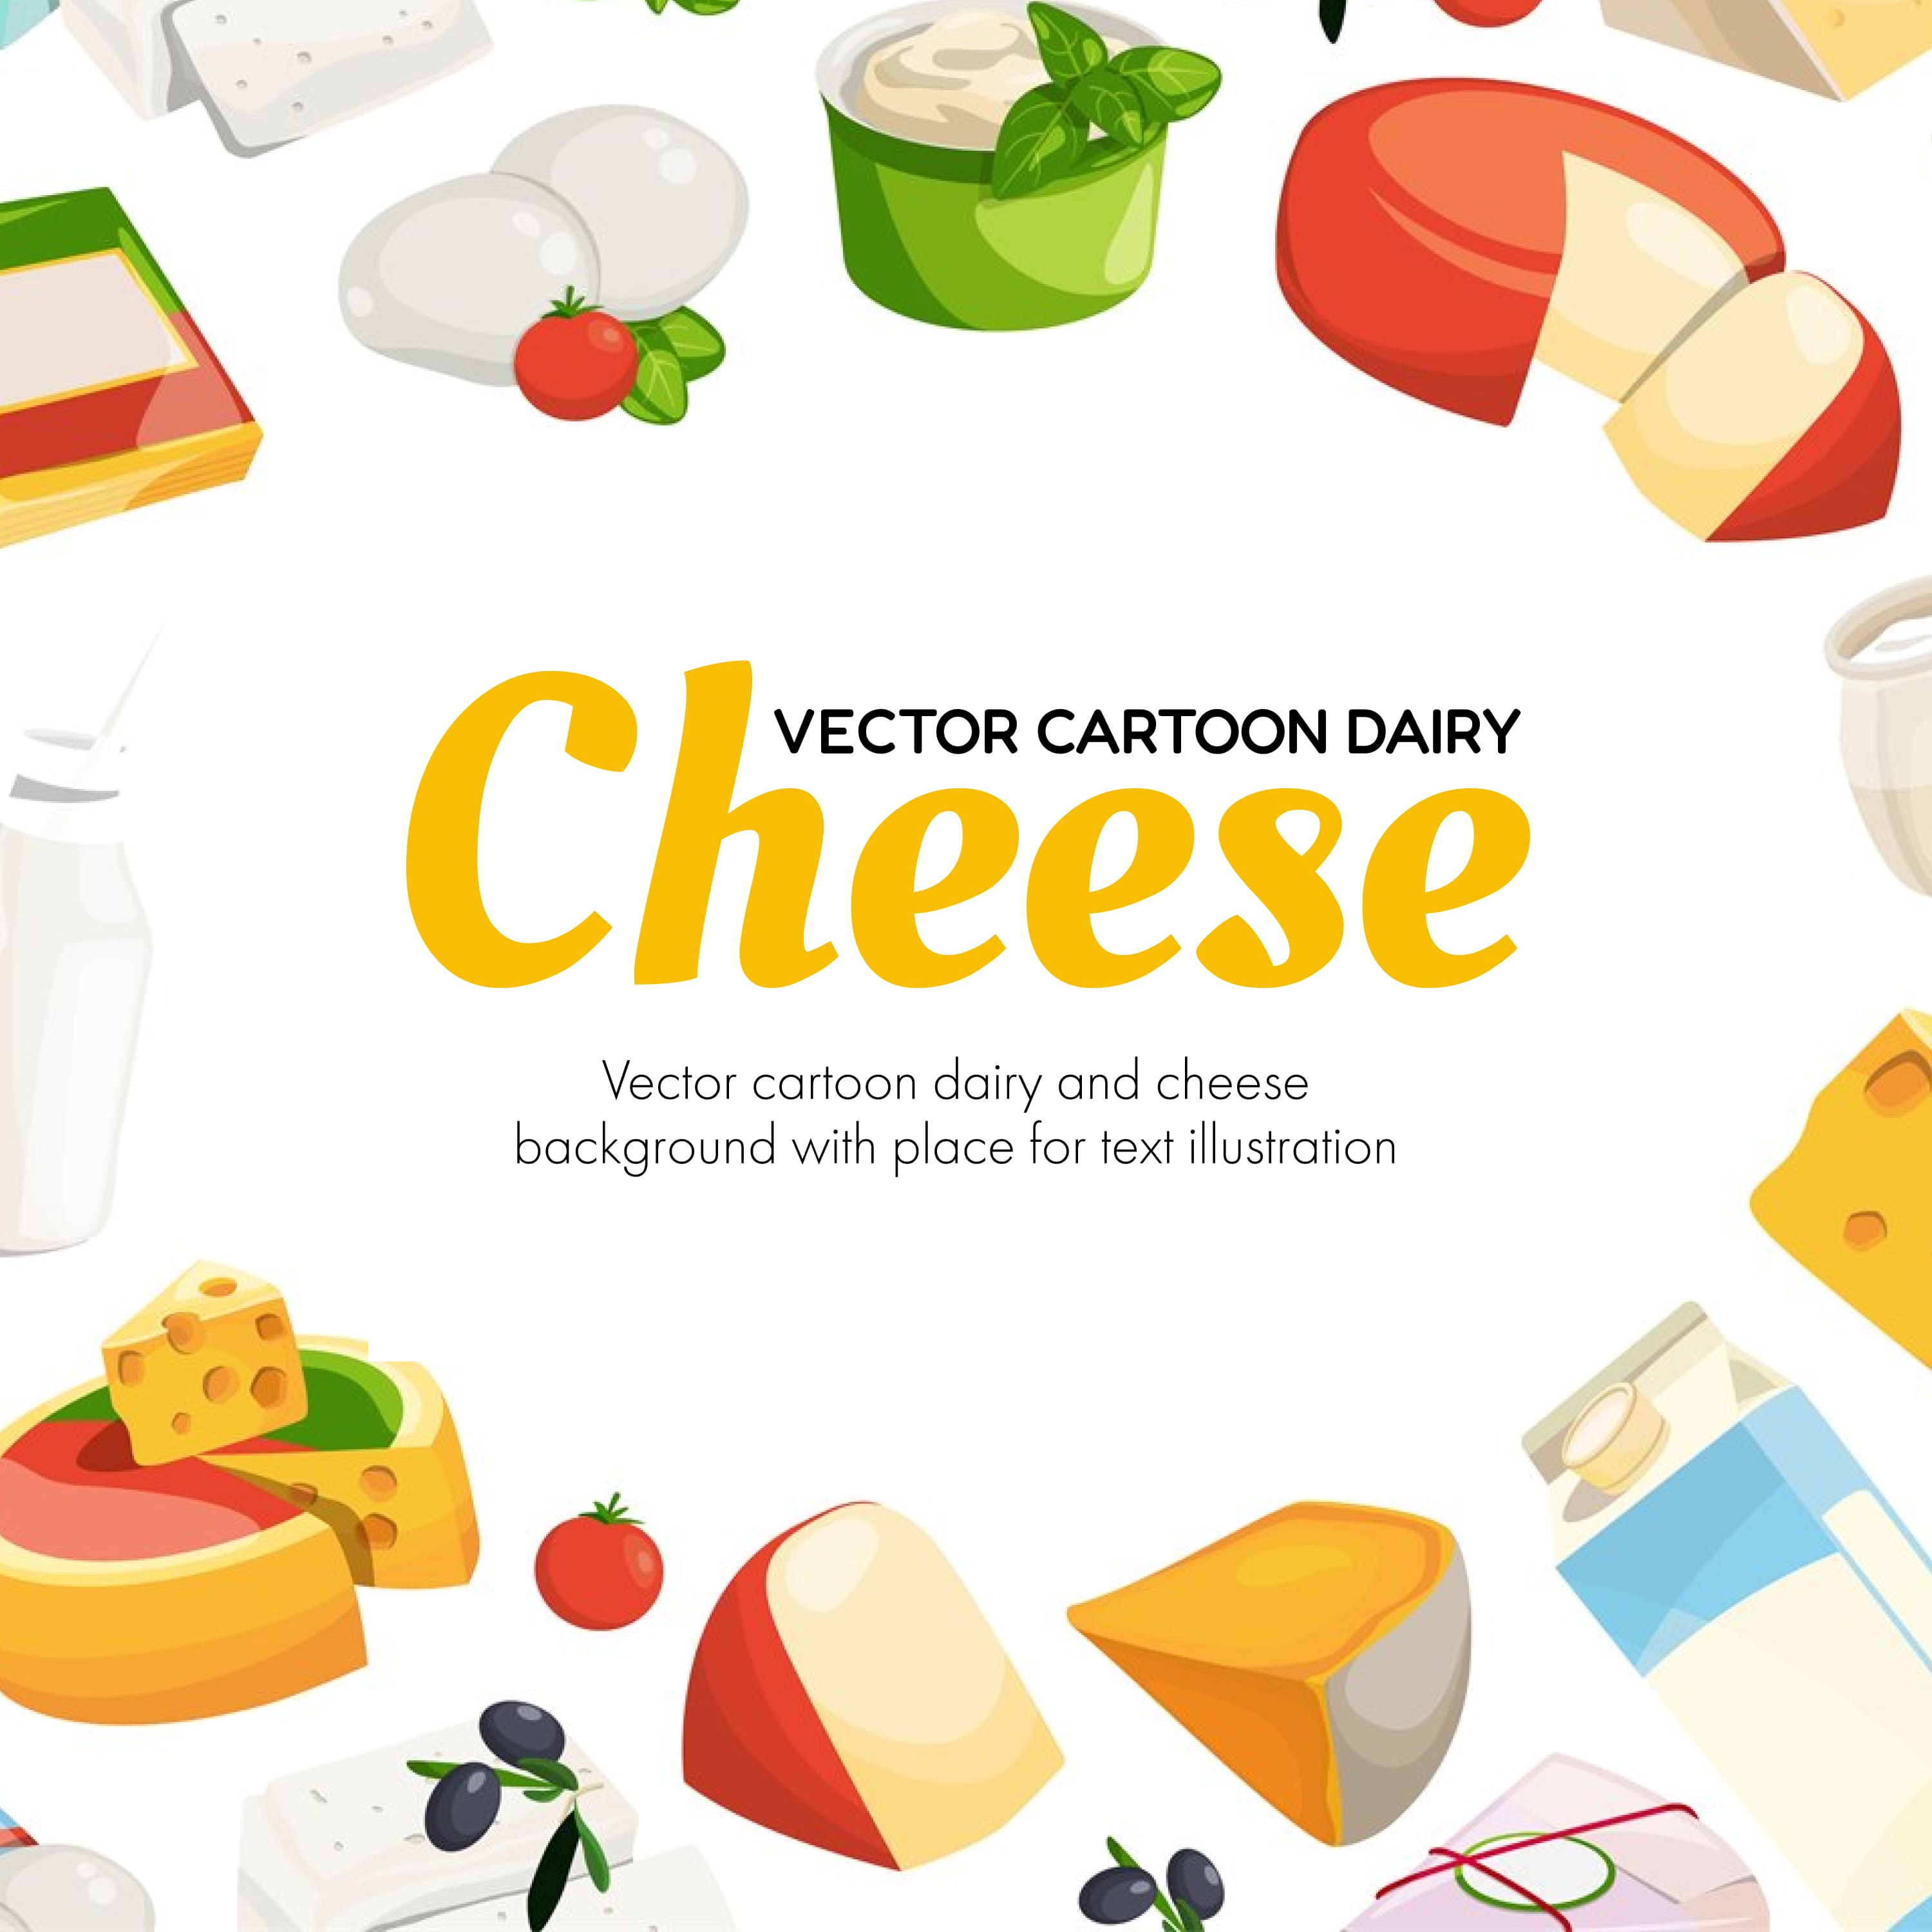 Cover from images of milk and different types of cheese.